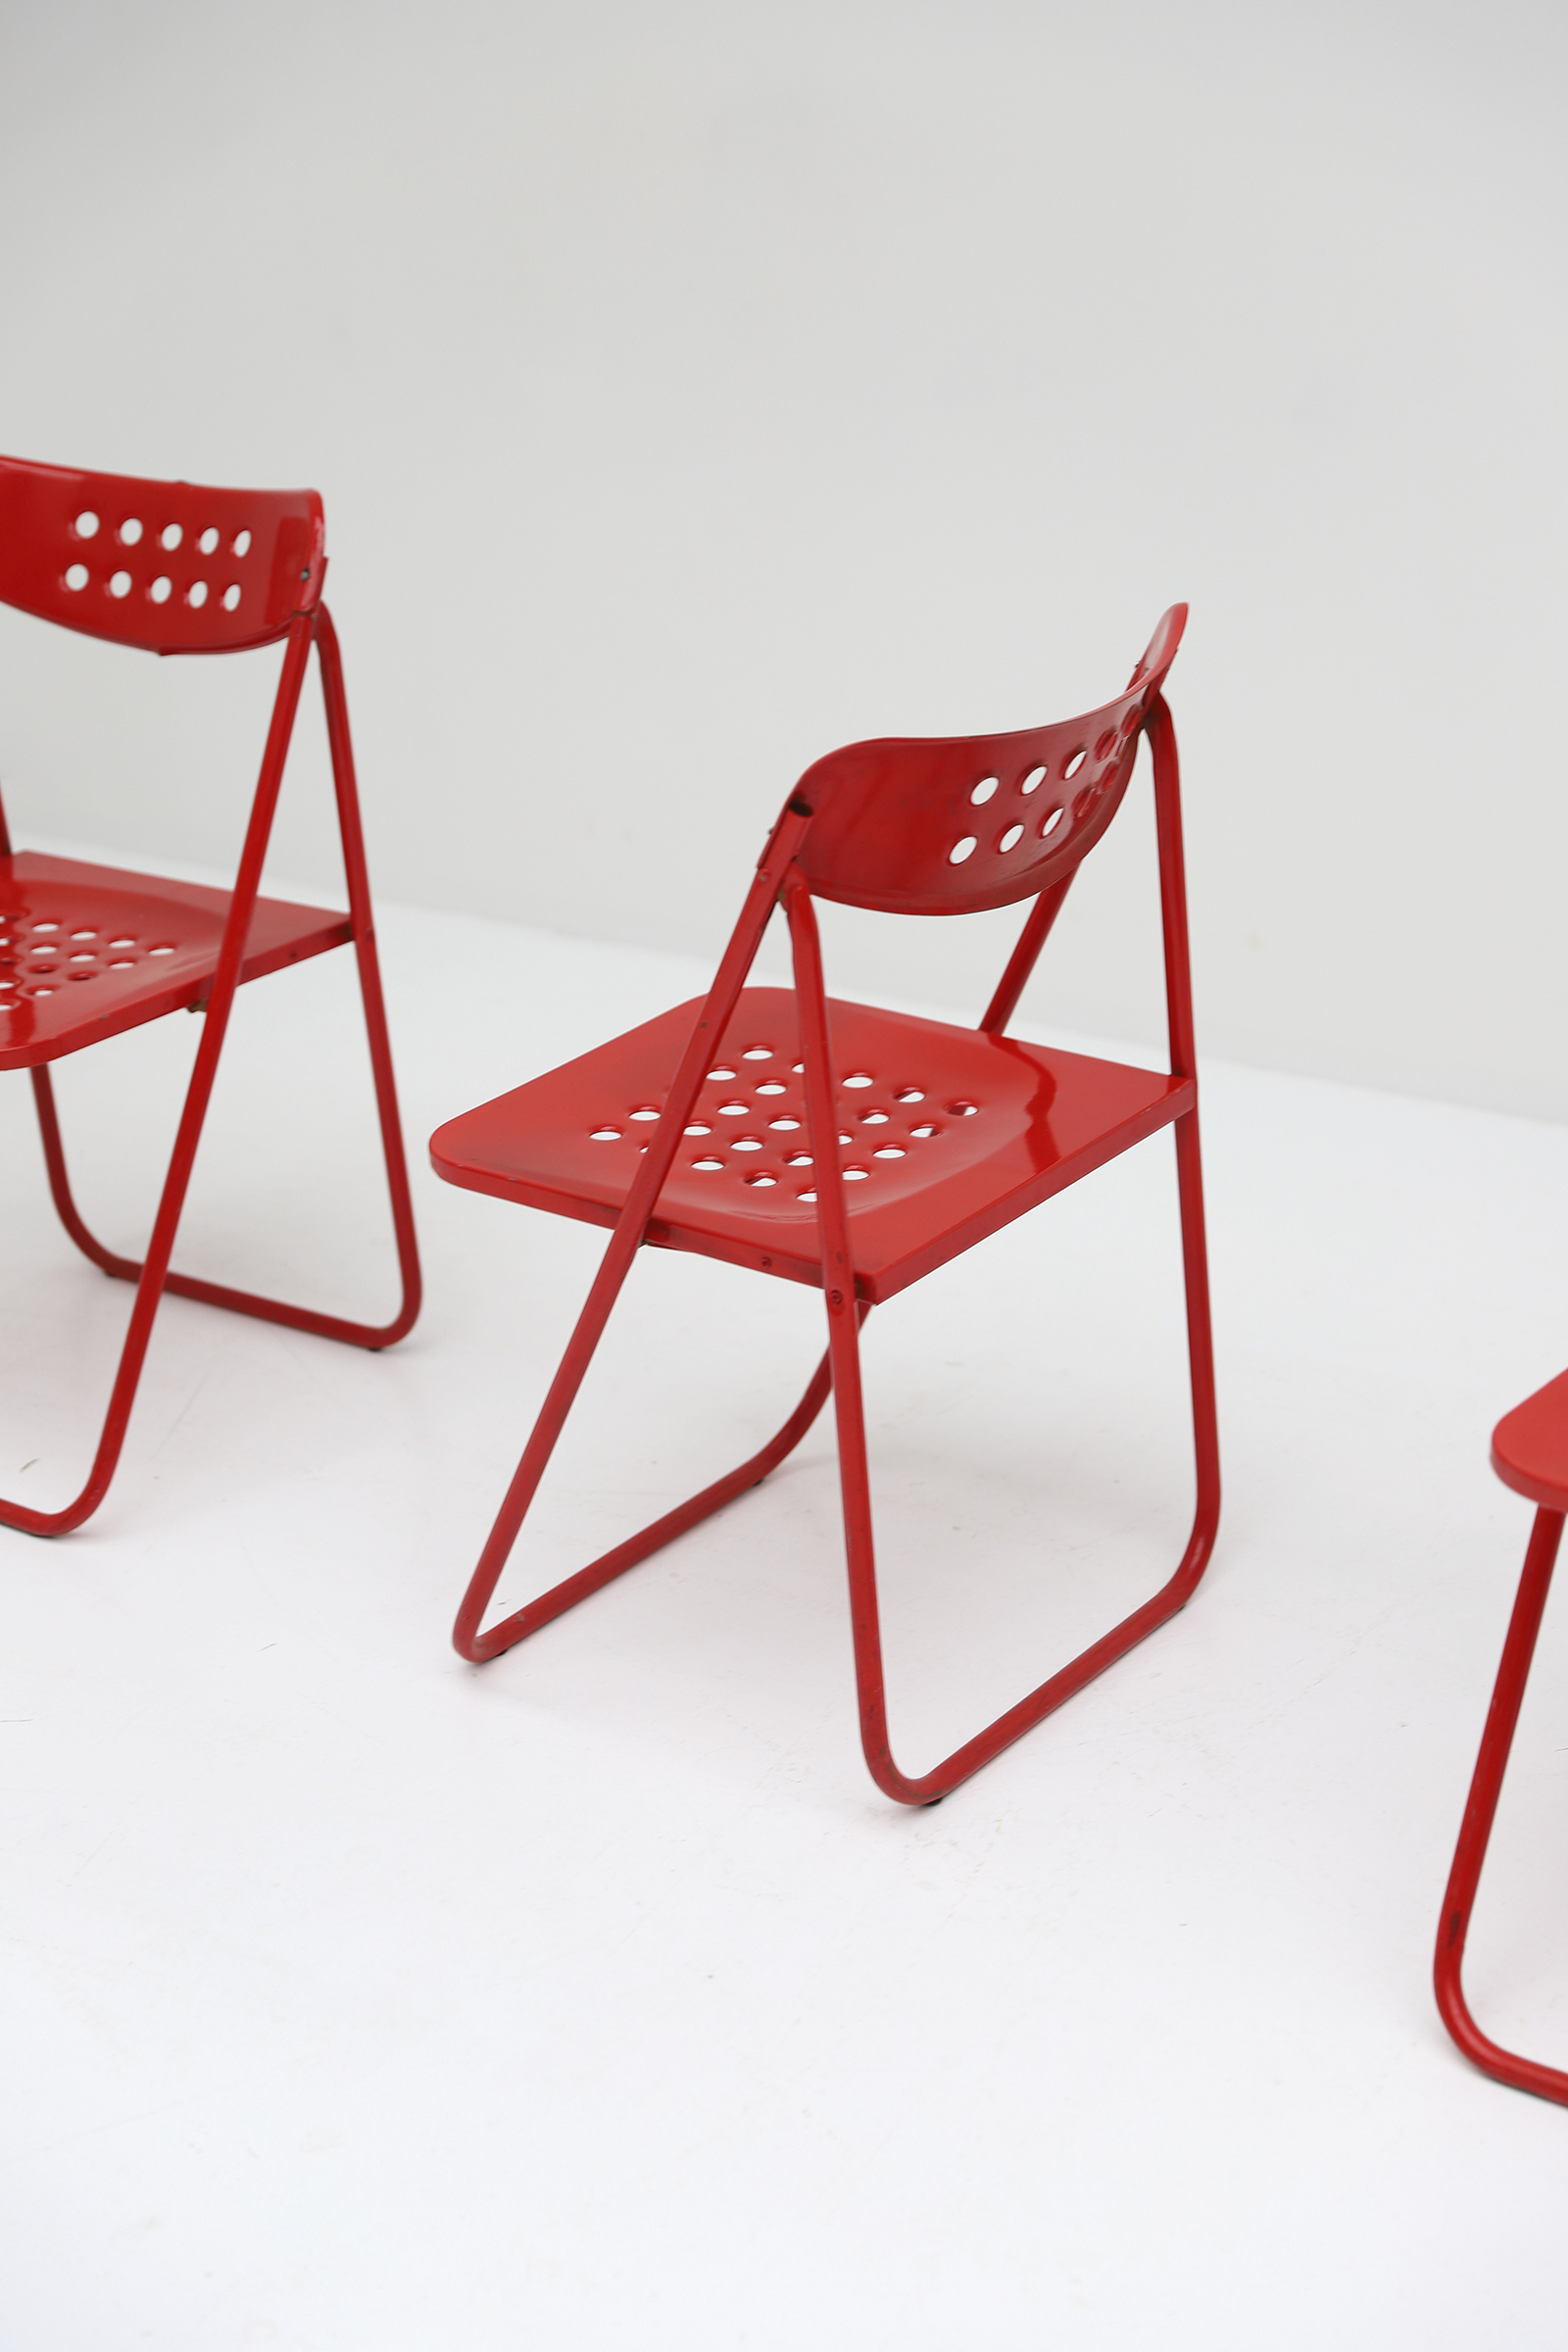 Red Metal Folding Chairs 1980simage 4